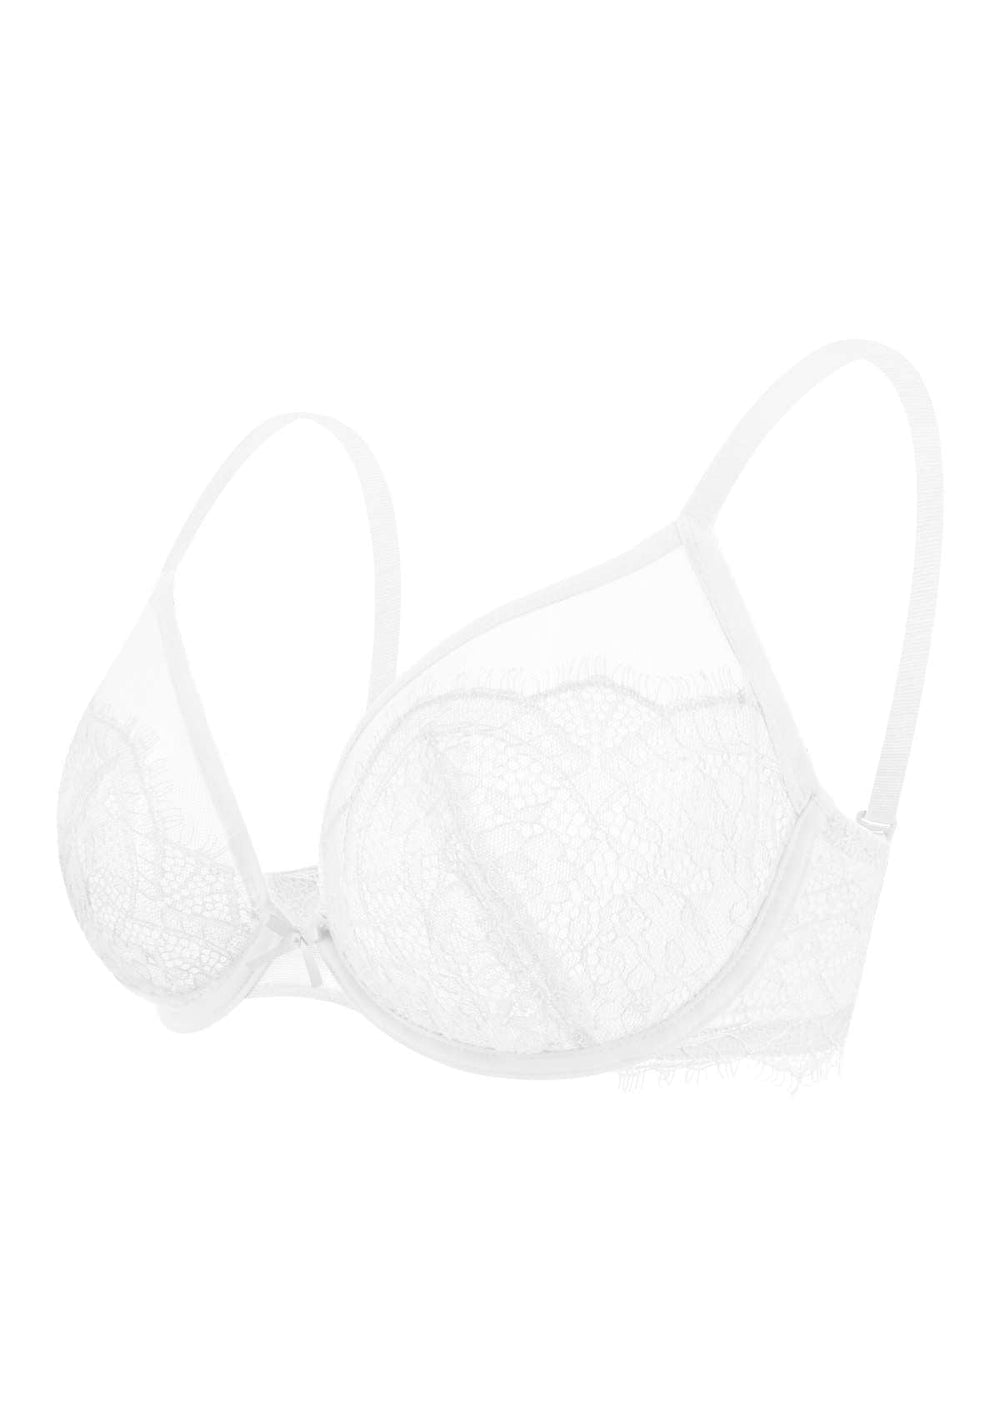 Barely Breezies Set of 2 Underwire Unlined Mesh Bras with Nancy